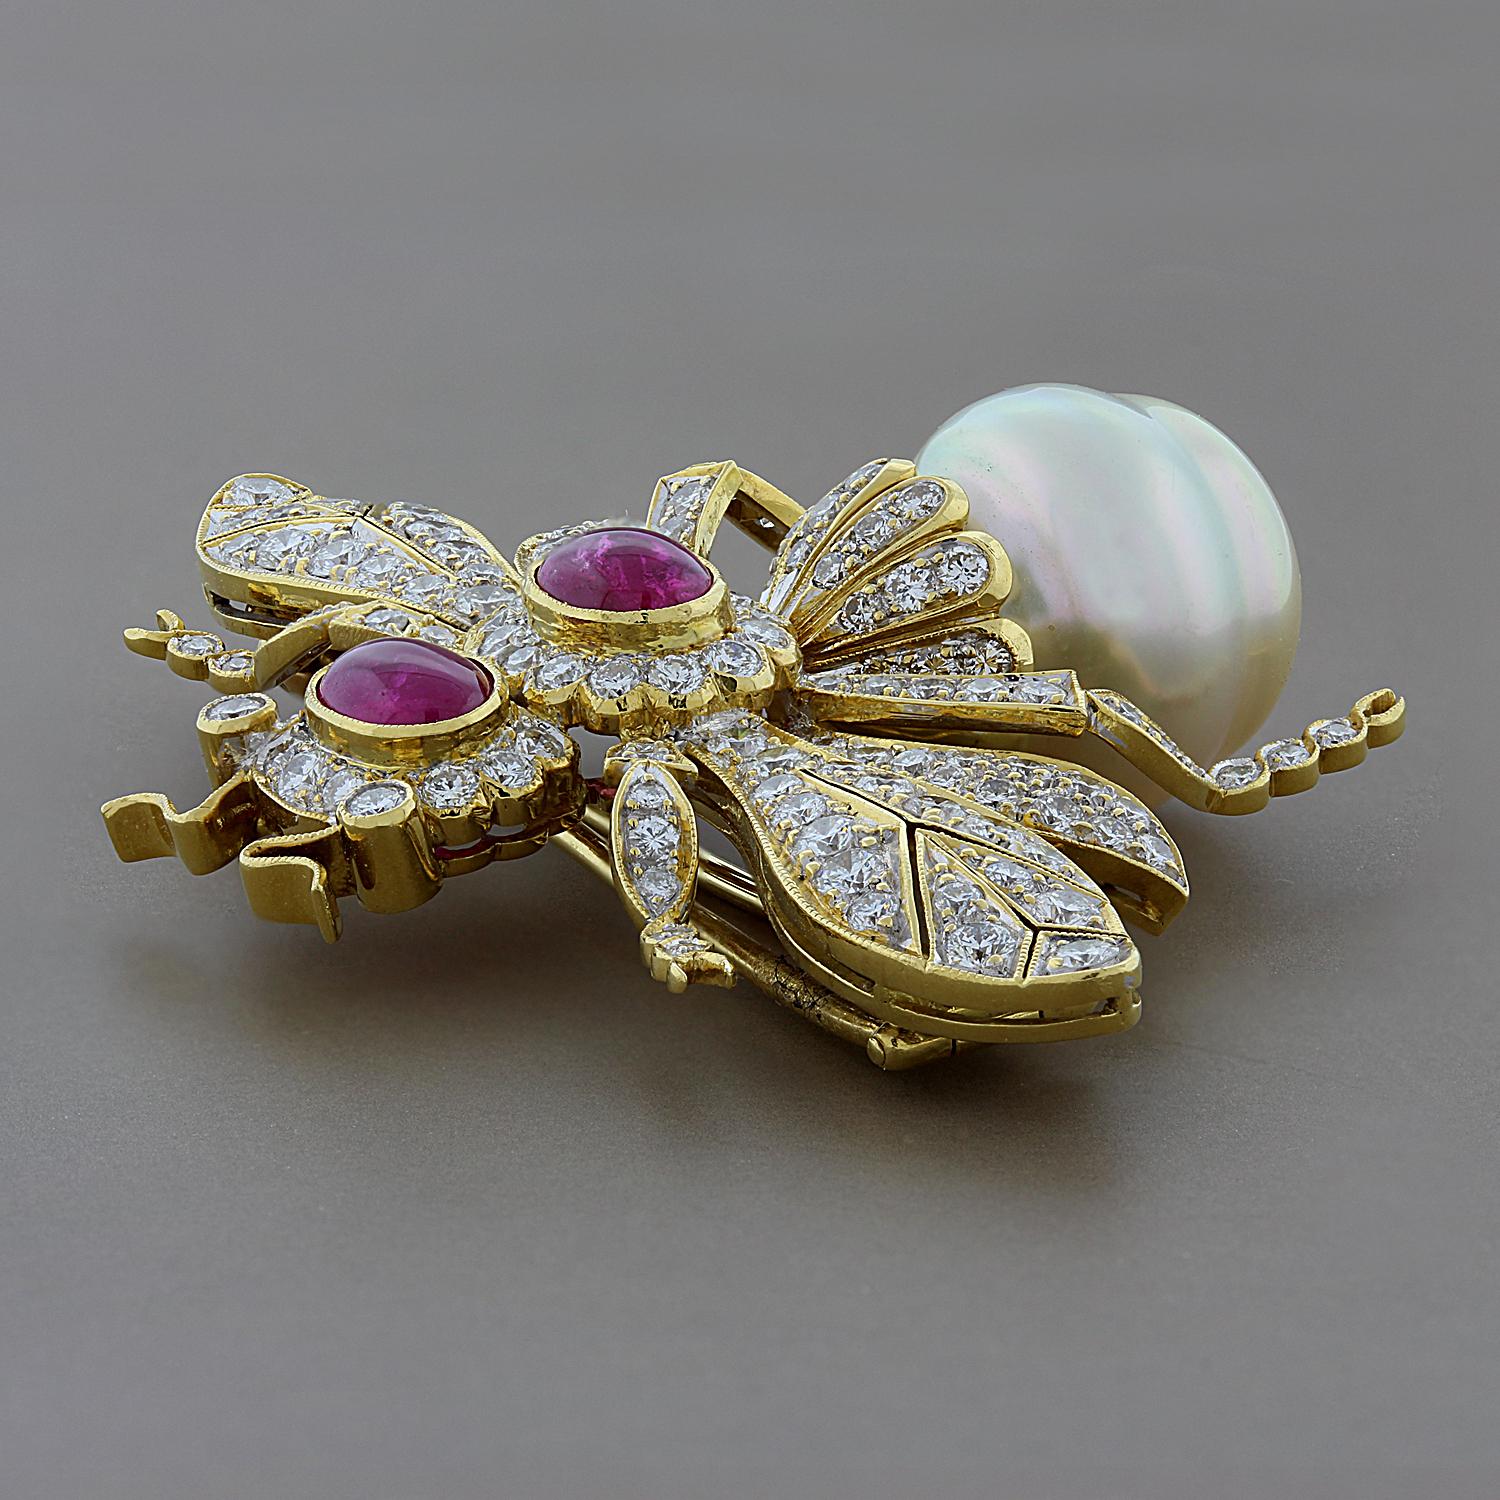 Queen Bee! An exciting estate brooch featuring 2.45 carats of VS quality colorless diamonds and 1.40 carats of cabochon rubies all set in 18K yellow gold. This queen has a fearsome baroque pearl stinger. Catch it if you can.

Brooch Length: 1.45